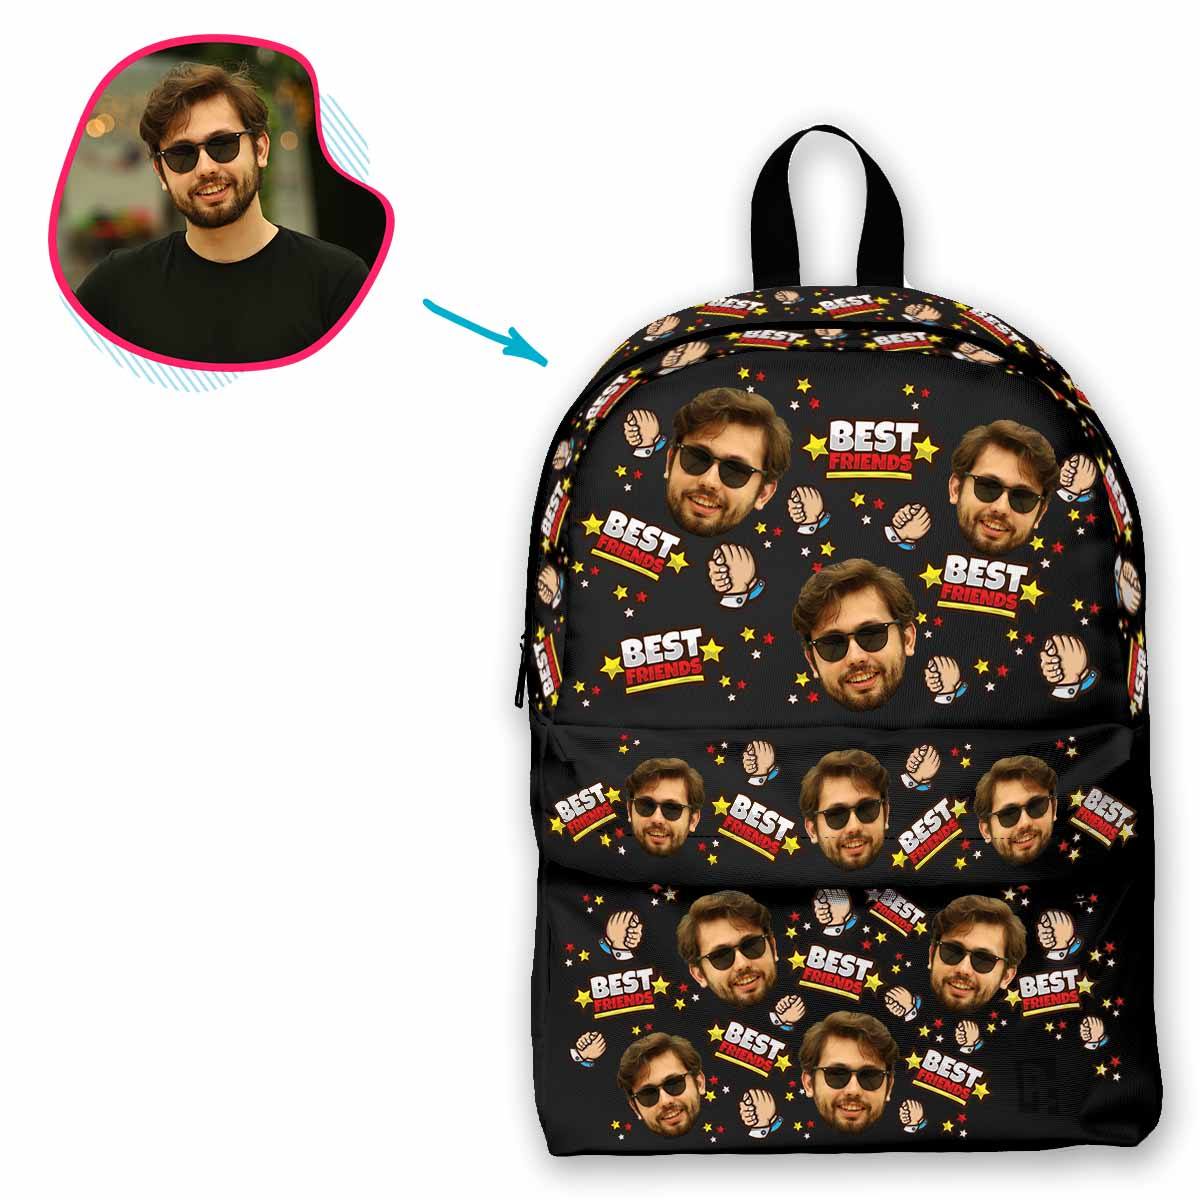 dark Best Friends classic backpack personalized with photo of face printed on it